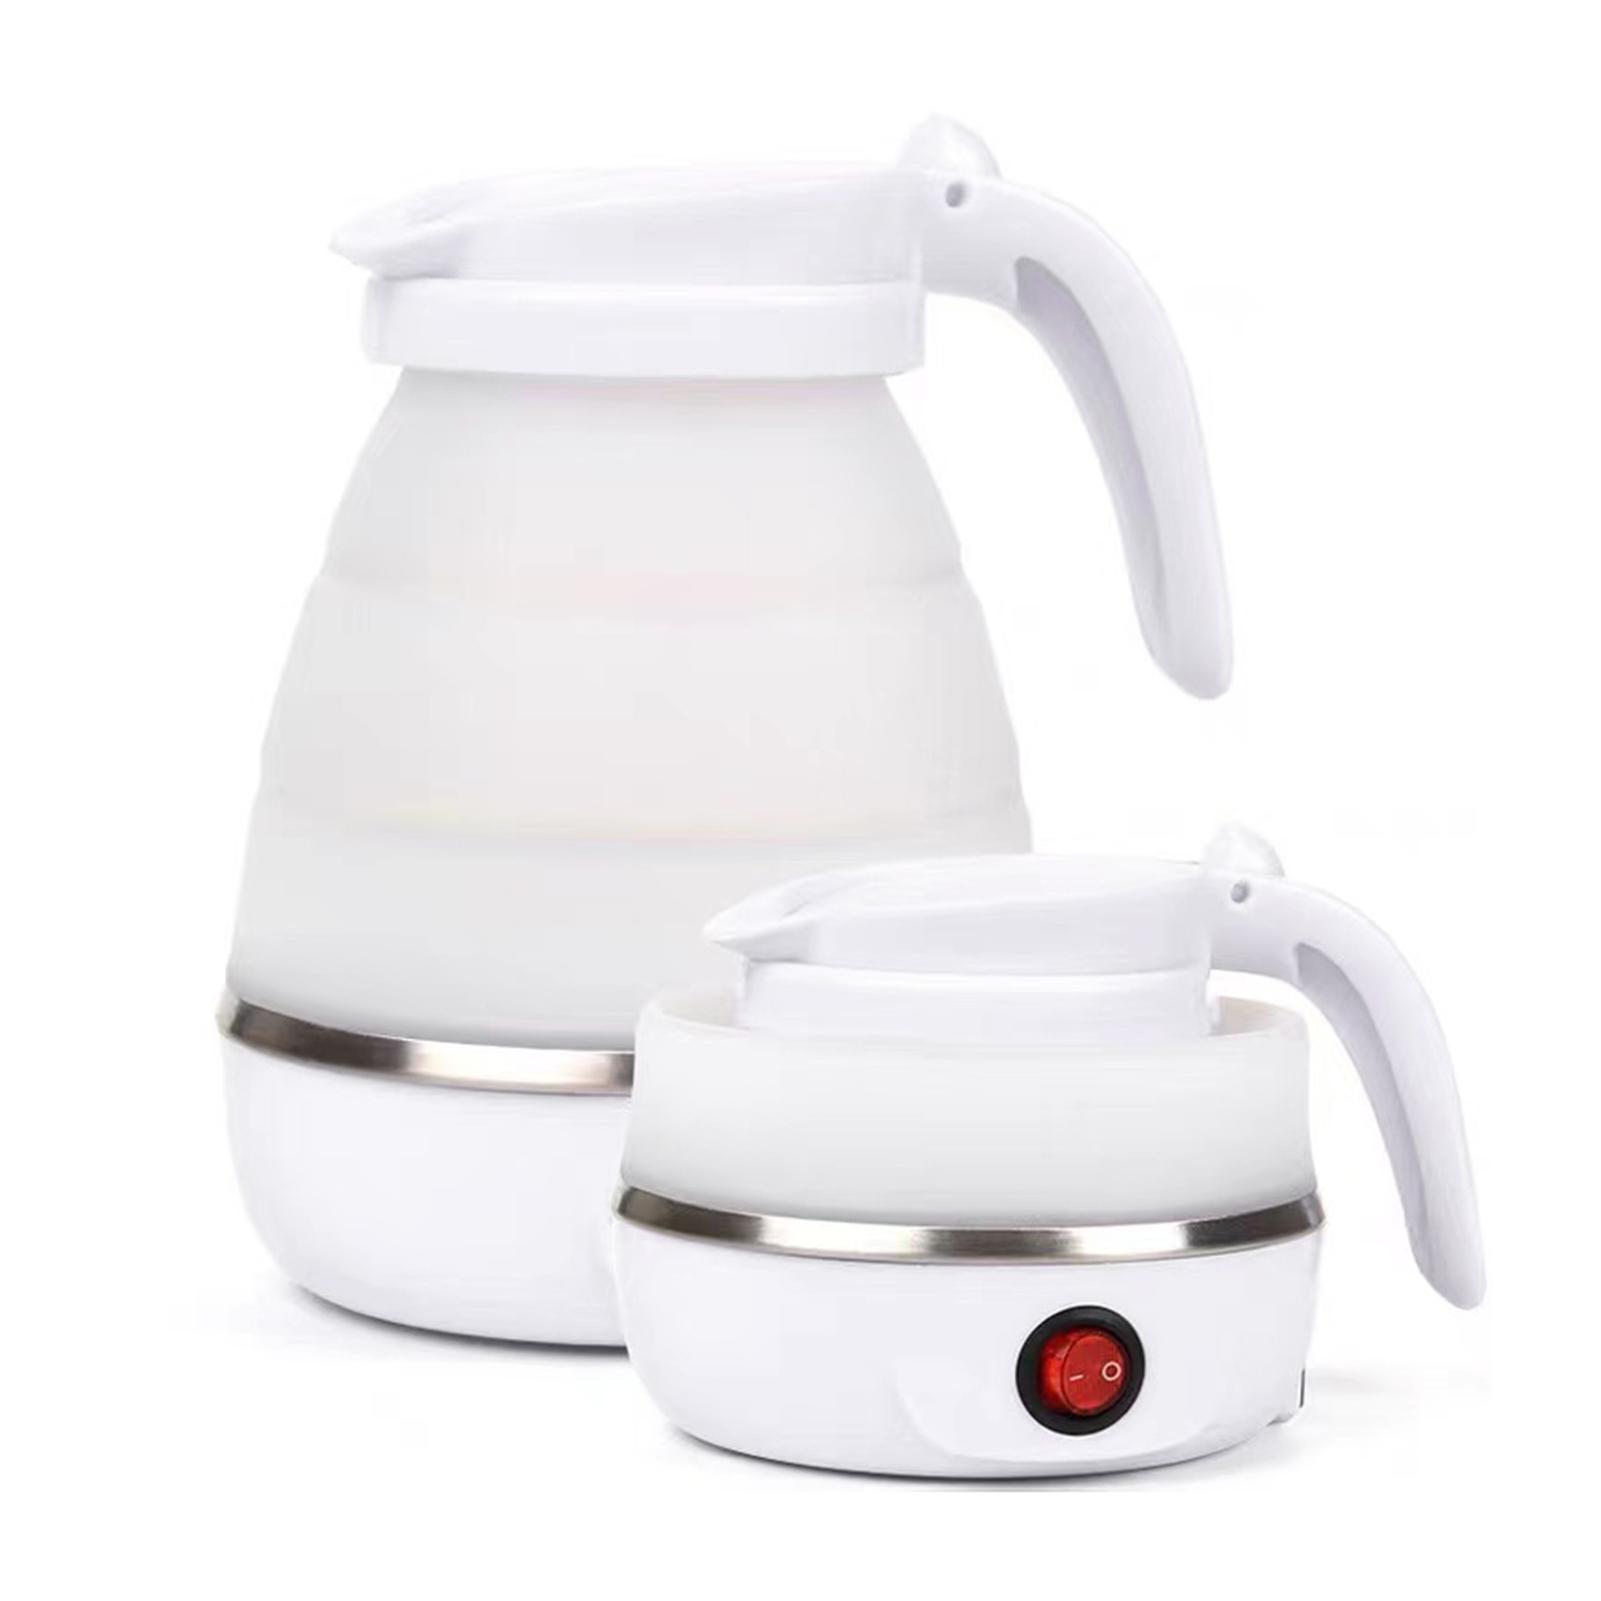 Travel Home Silicone Foldable Kettle Portable Automatic Electric Kettle